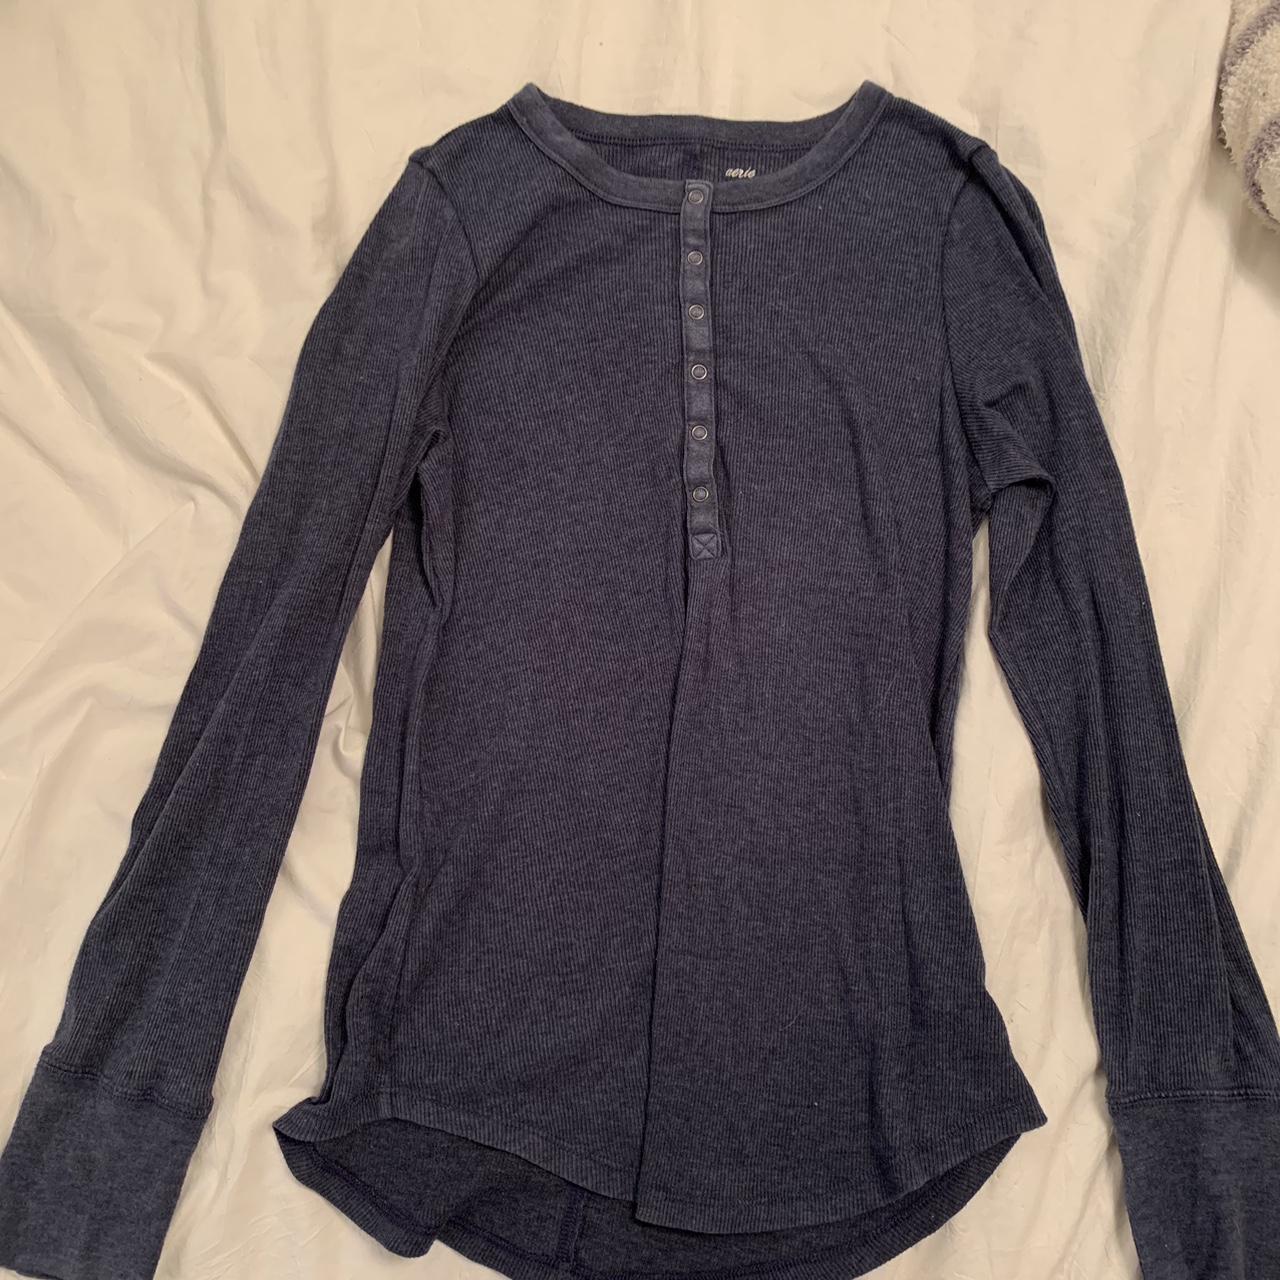 2 Aerie long sleeve button tops. Super cute and... - Depop